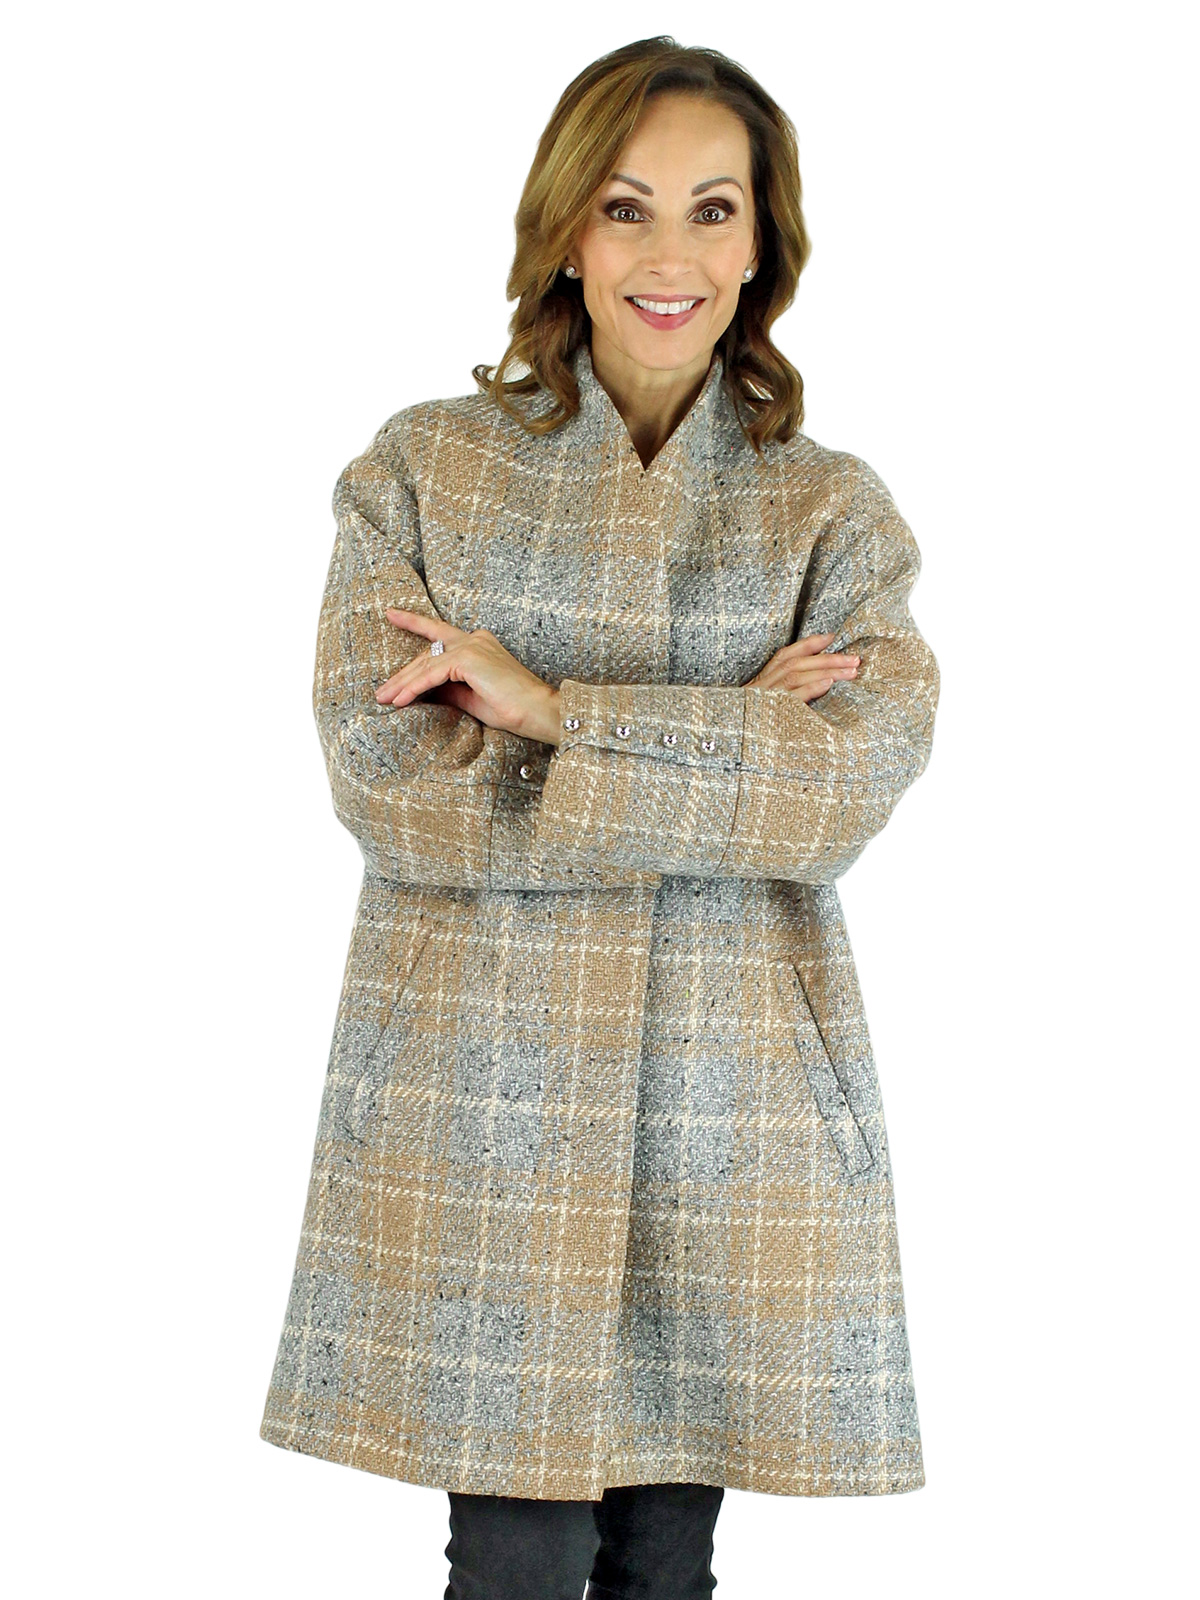 Woman's Beige and Grey Woven Wool 7/8 Coat